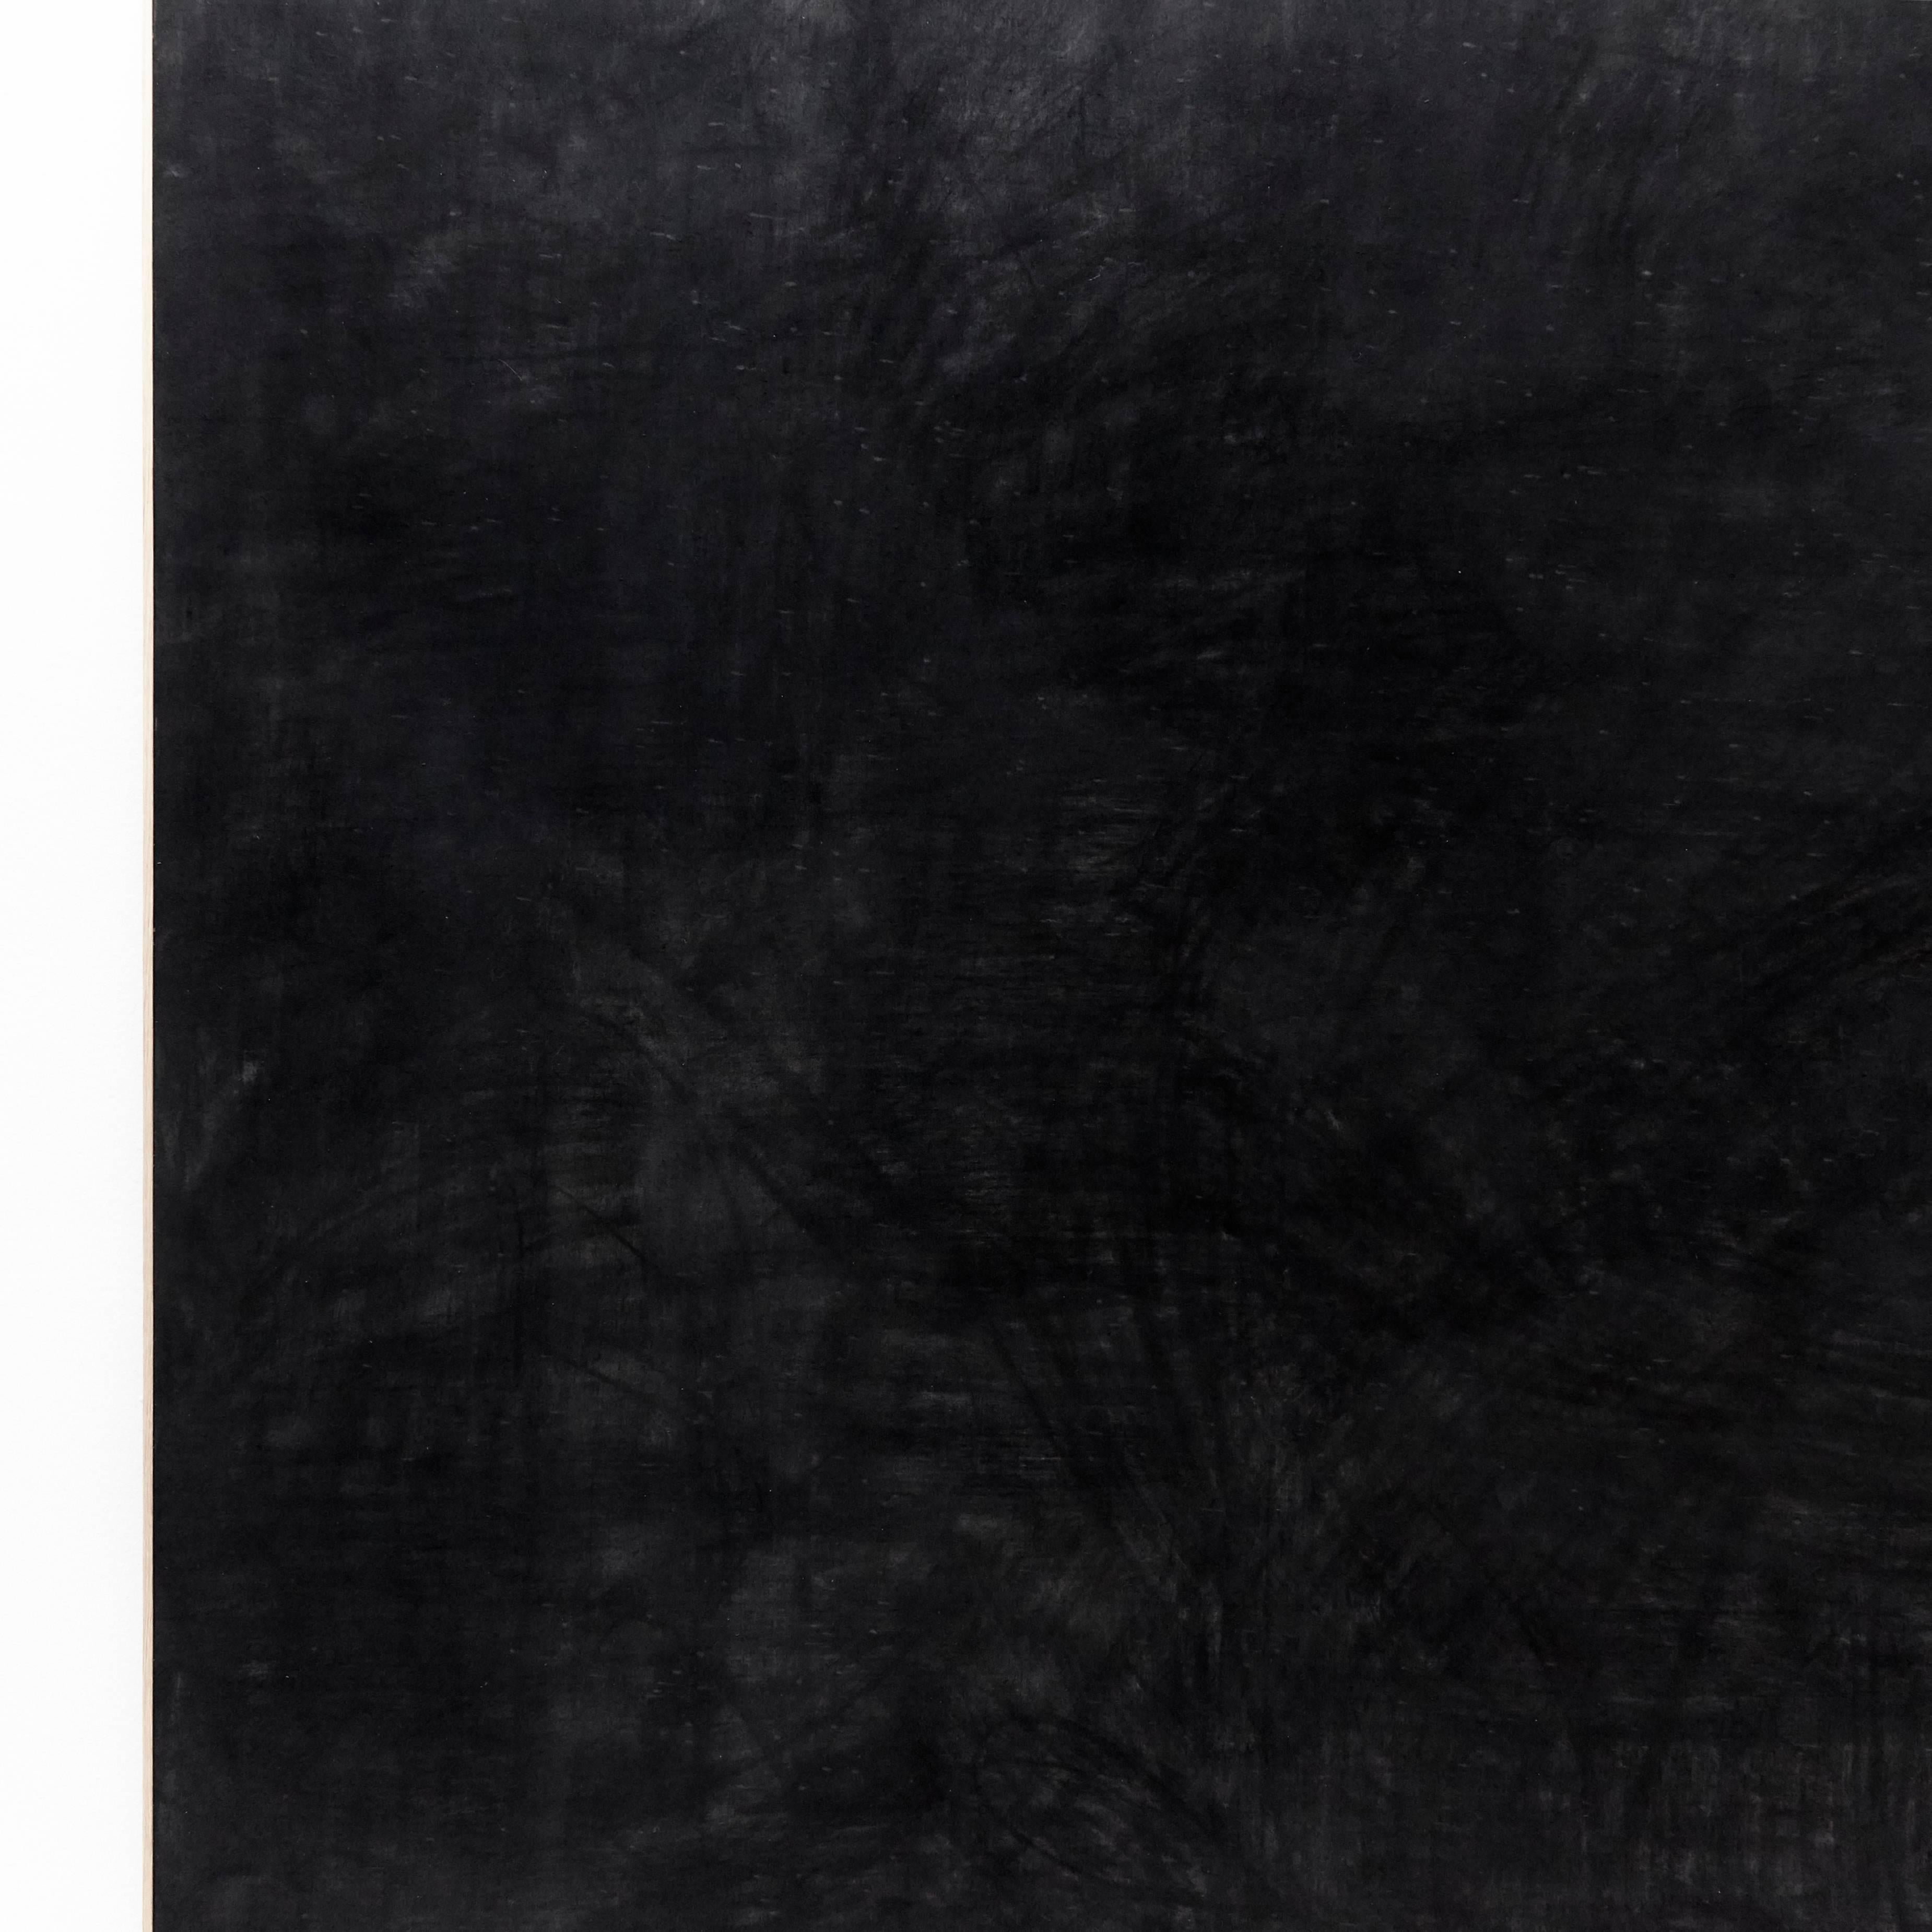 Spanish Enrico Della Torre Large Minimalist Abstract Black Charcoal Painting